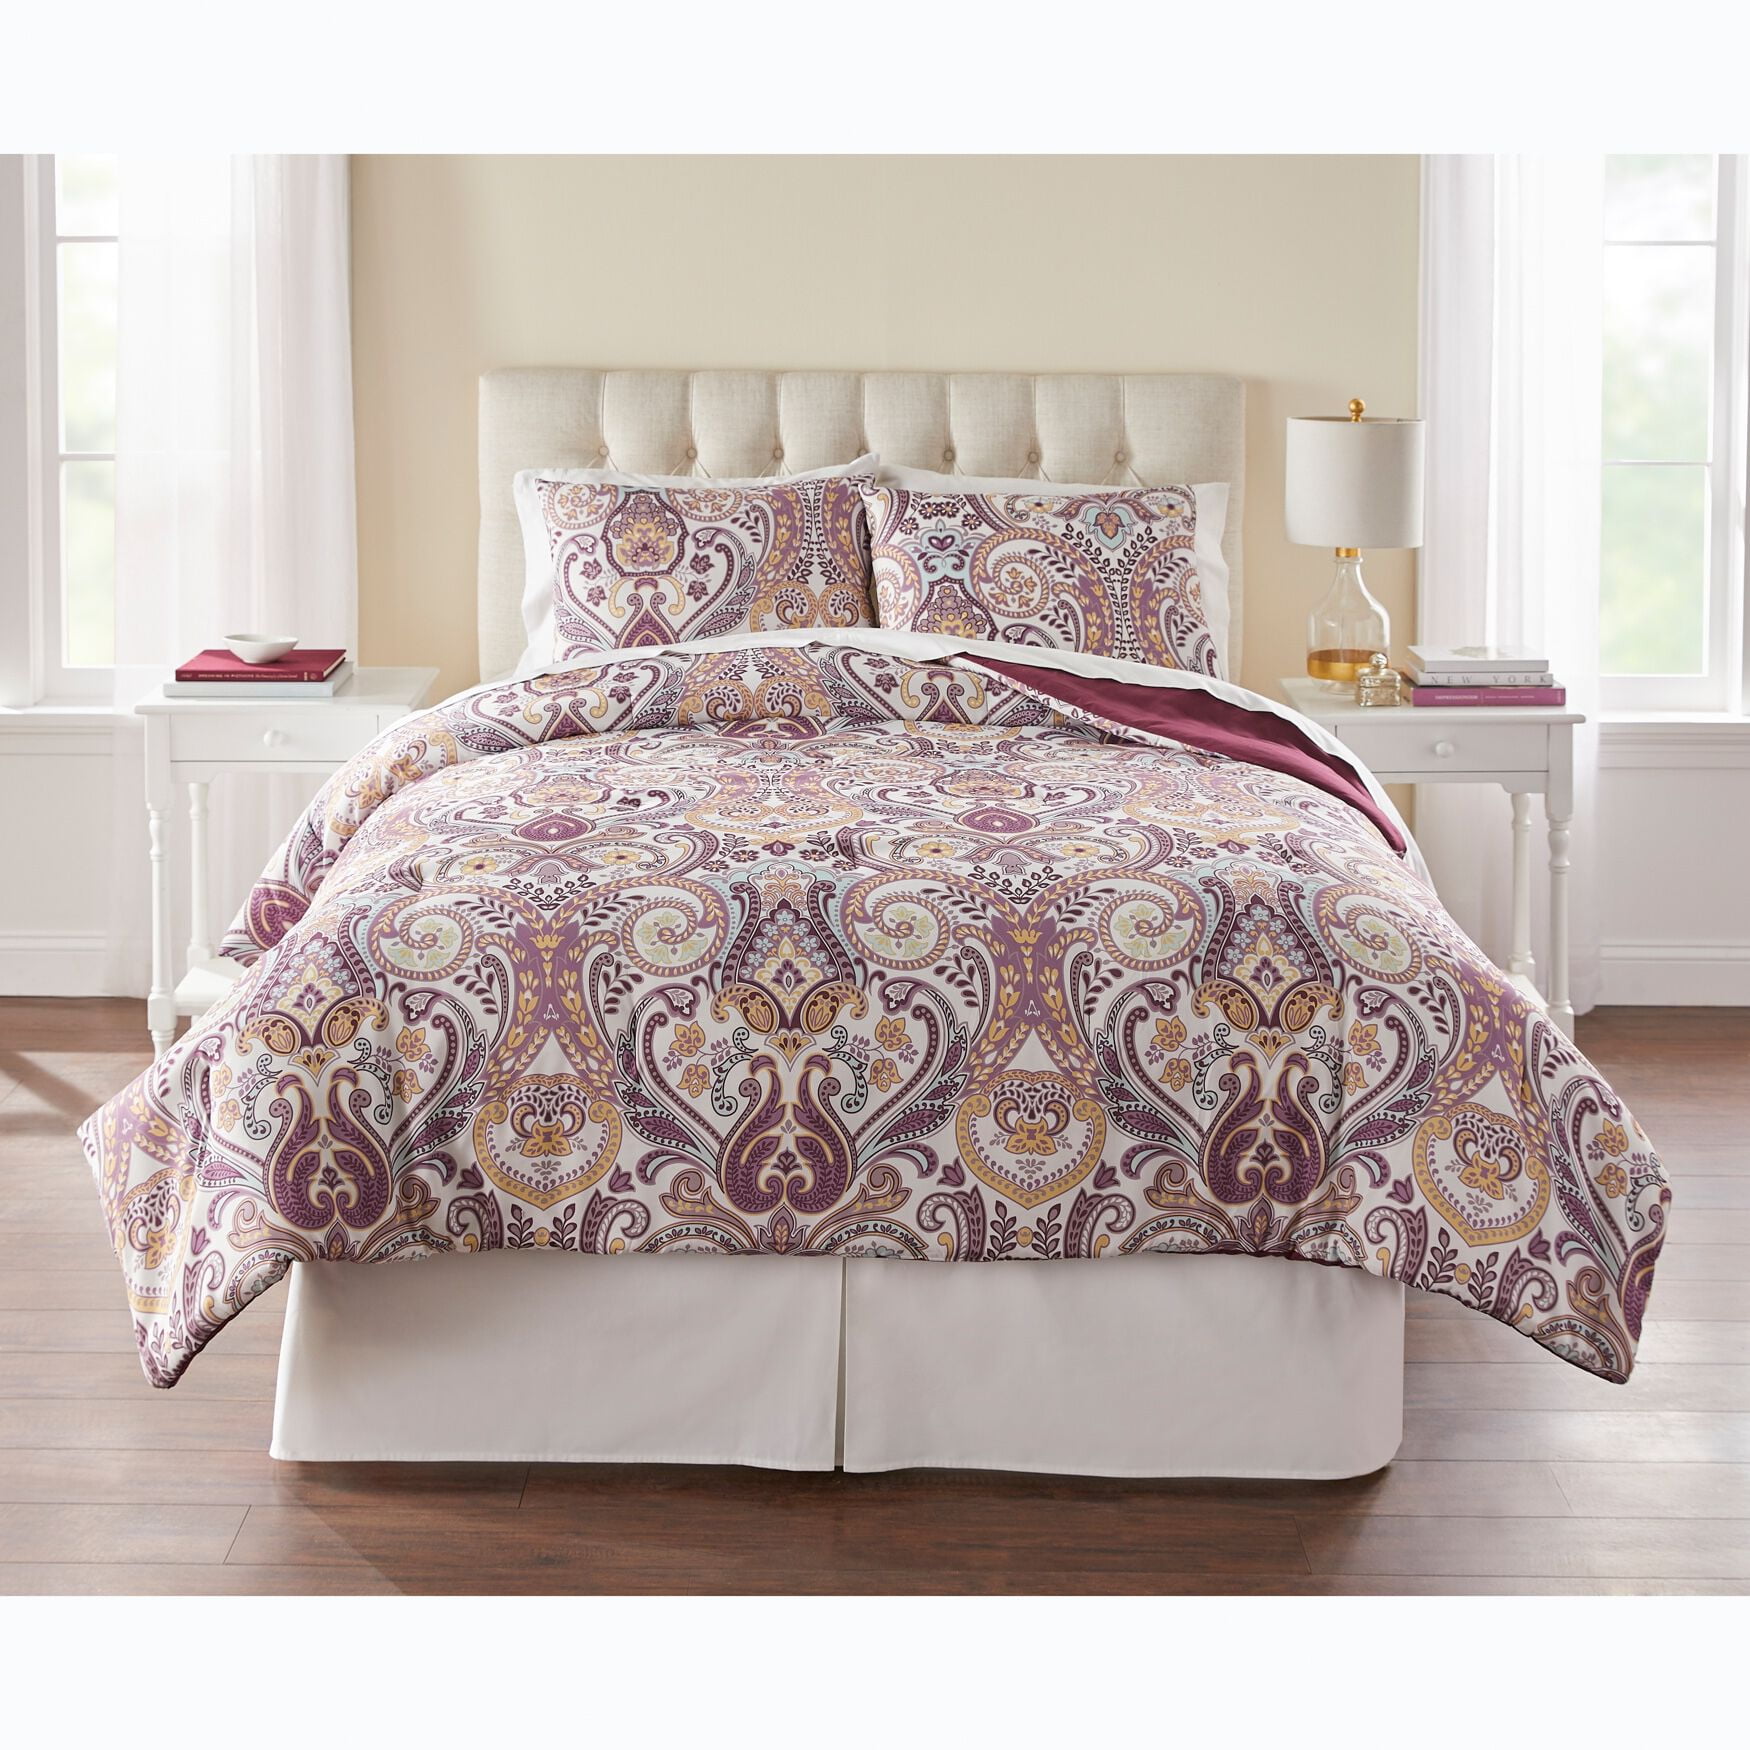 Details about   3Pc Purple Grey Black Gray Scroll Scroll Embroidery Down Alt Comforter Set King 